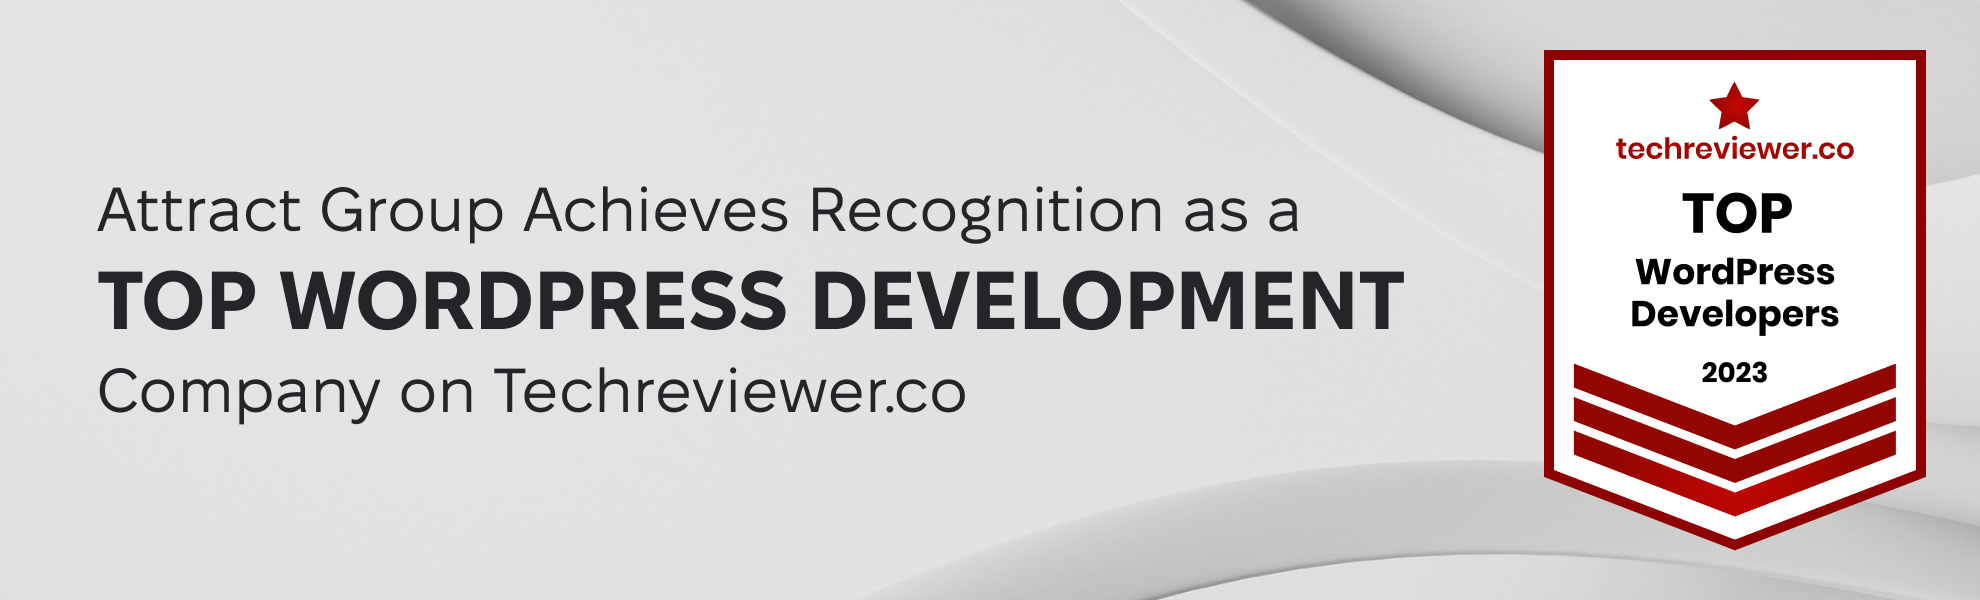 Attract Group Achieves Recognition as a Top WordPress DevelopmentCompany on Techreviewer.co